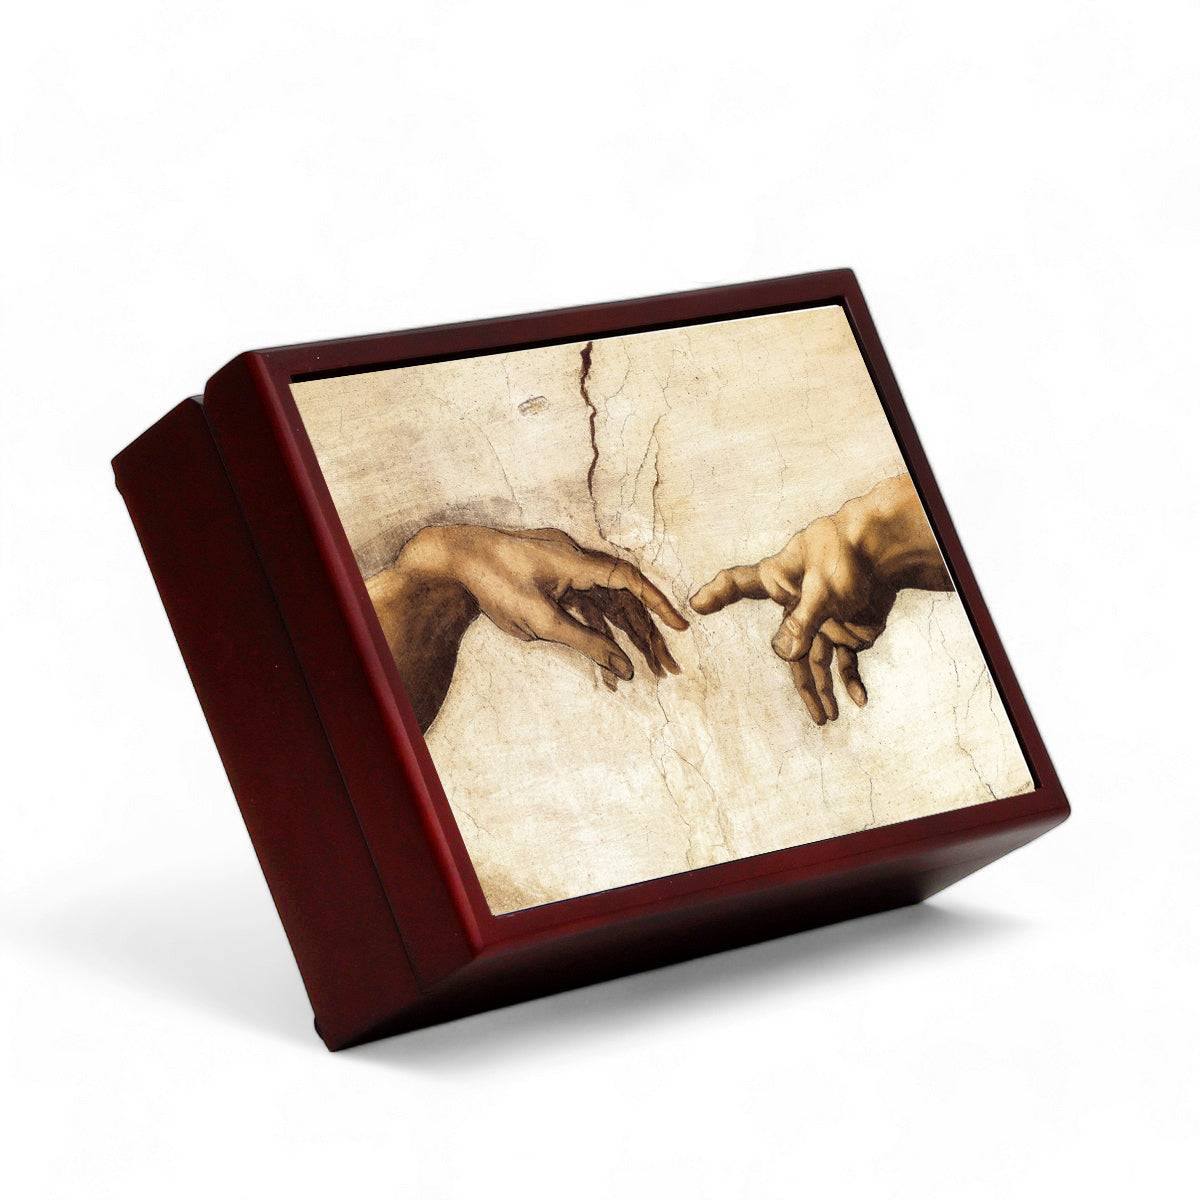 WOOD BOXES COLLECTION: Lined large wood box with printed tile - Opera "Detail of The Creation of Adam" by Michelangelo Buonarroti